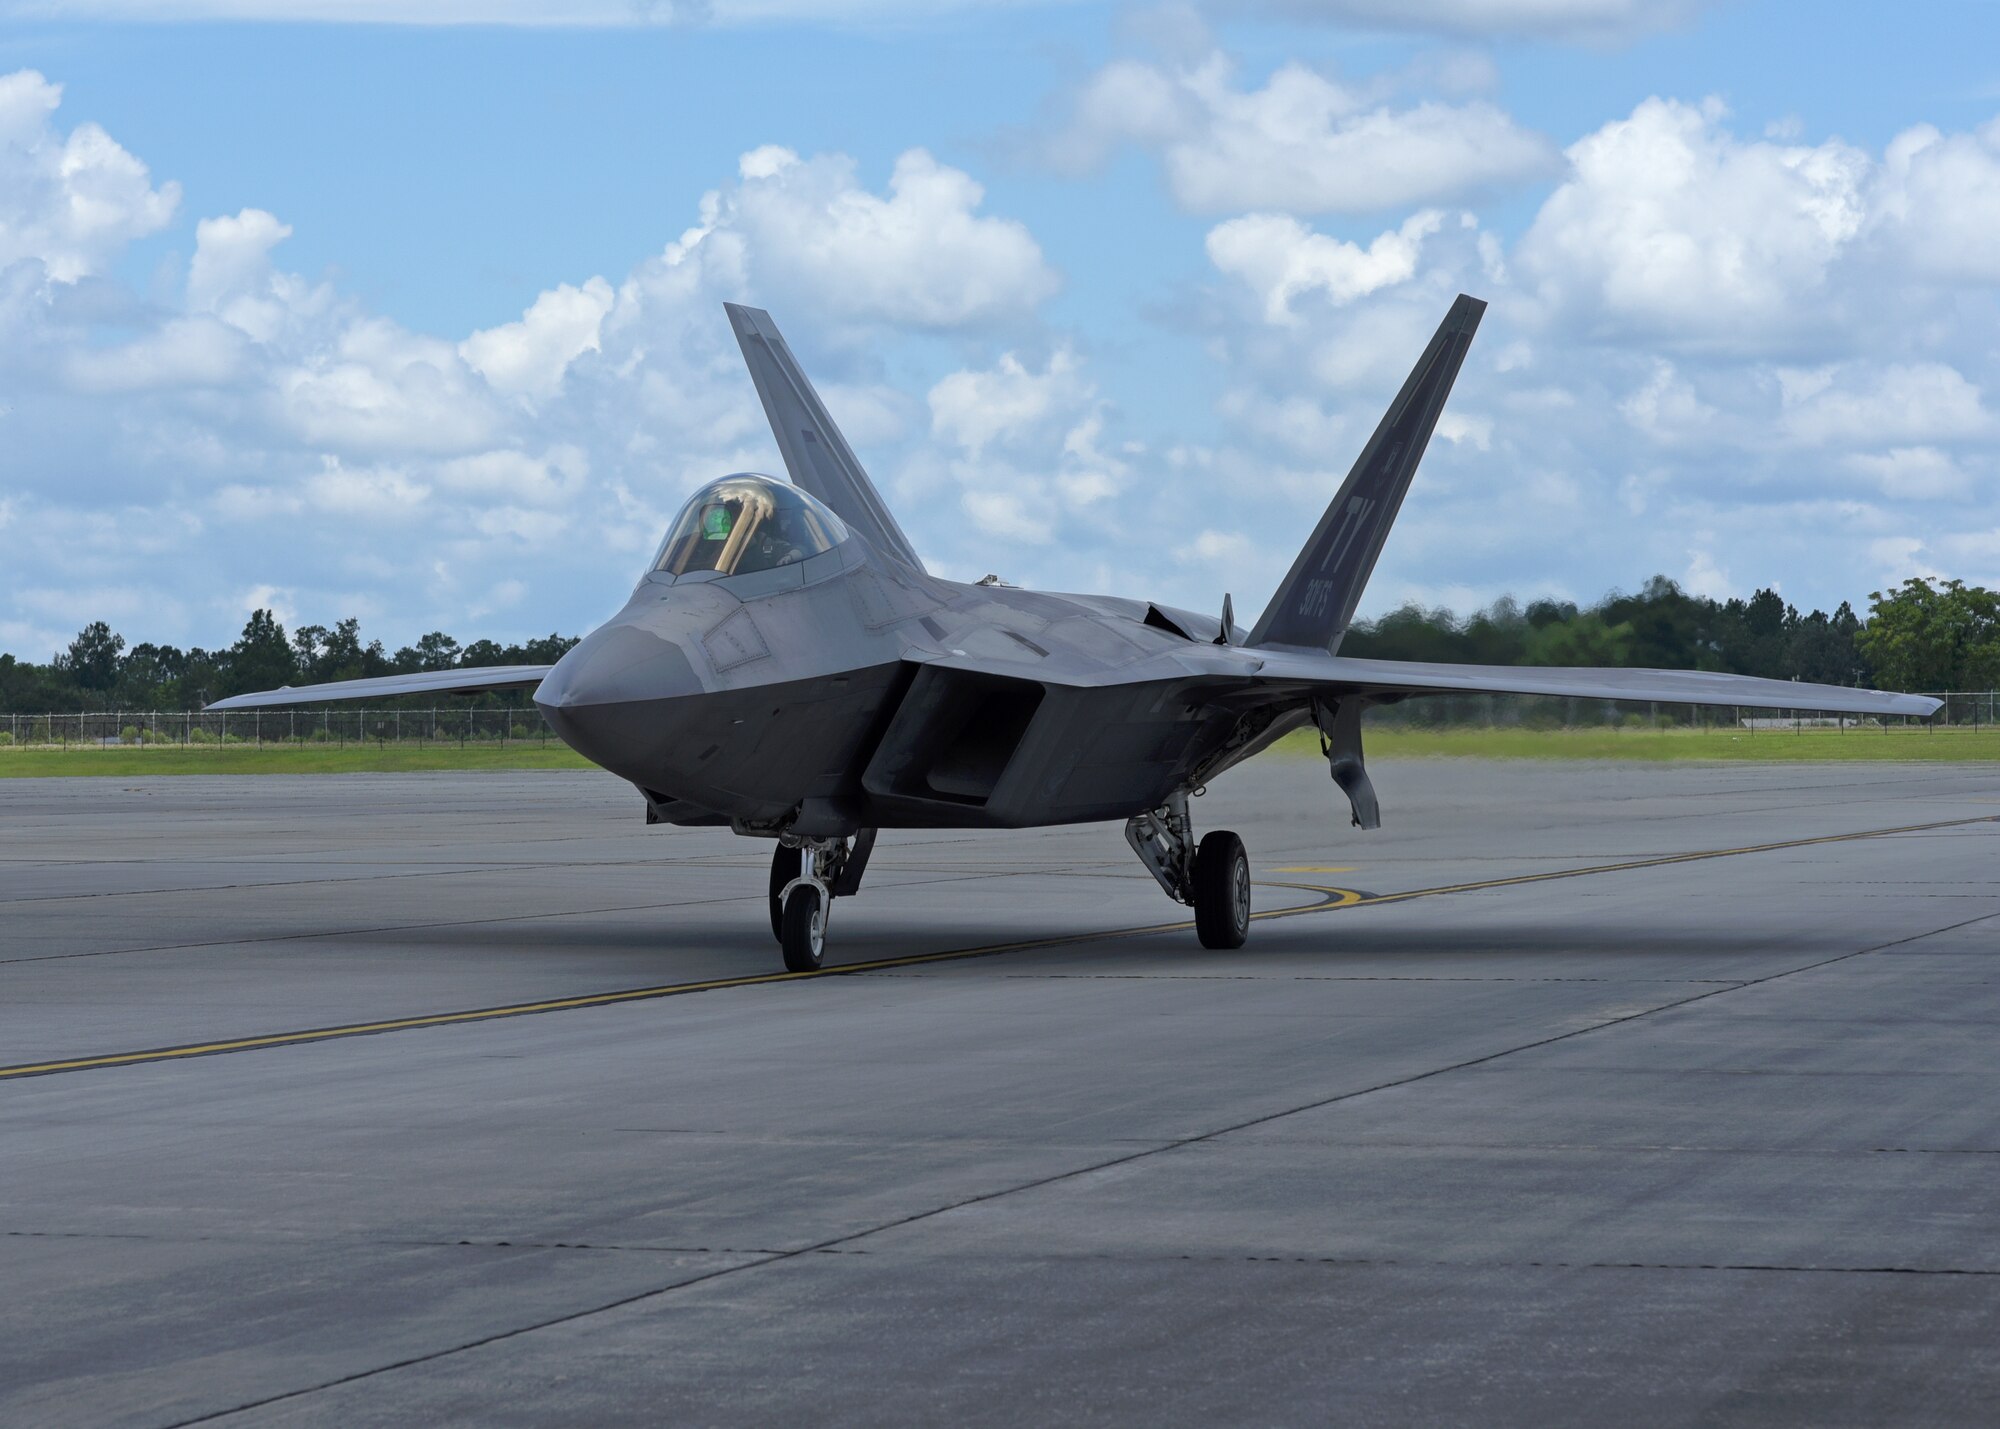 A 95th Fighter Squadron F-22 Raptor from Tyndall Air Force Base, Florida, sits on the flightline during exercise Stealth Guardian at Moody Air Force Base, Georgia, Aug. 10, 2017. In order to become a qualified F-22 pilot, Tyndall student pilots from the 43rd Fighter Squadron have to complete a vigorous course of instruction that included academics events, examinations, sorties and simulator missions. (U.S. Air Force photo by Airman 1st Class Isaiah J. Soliz)